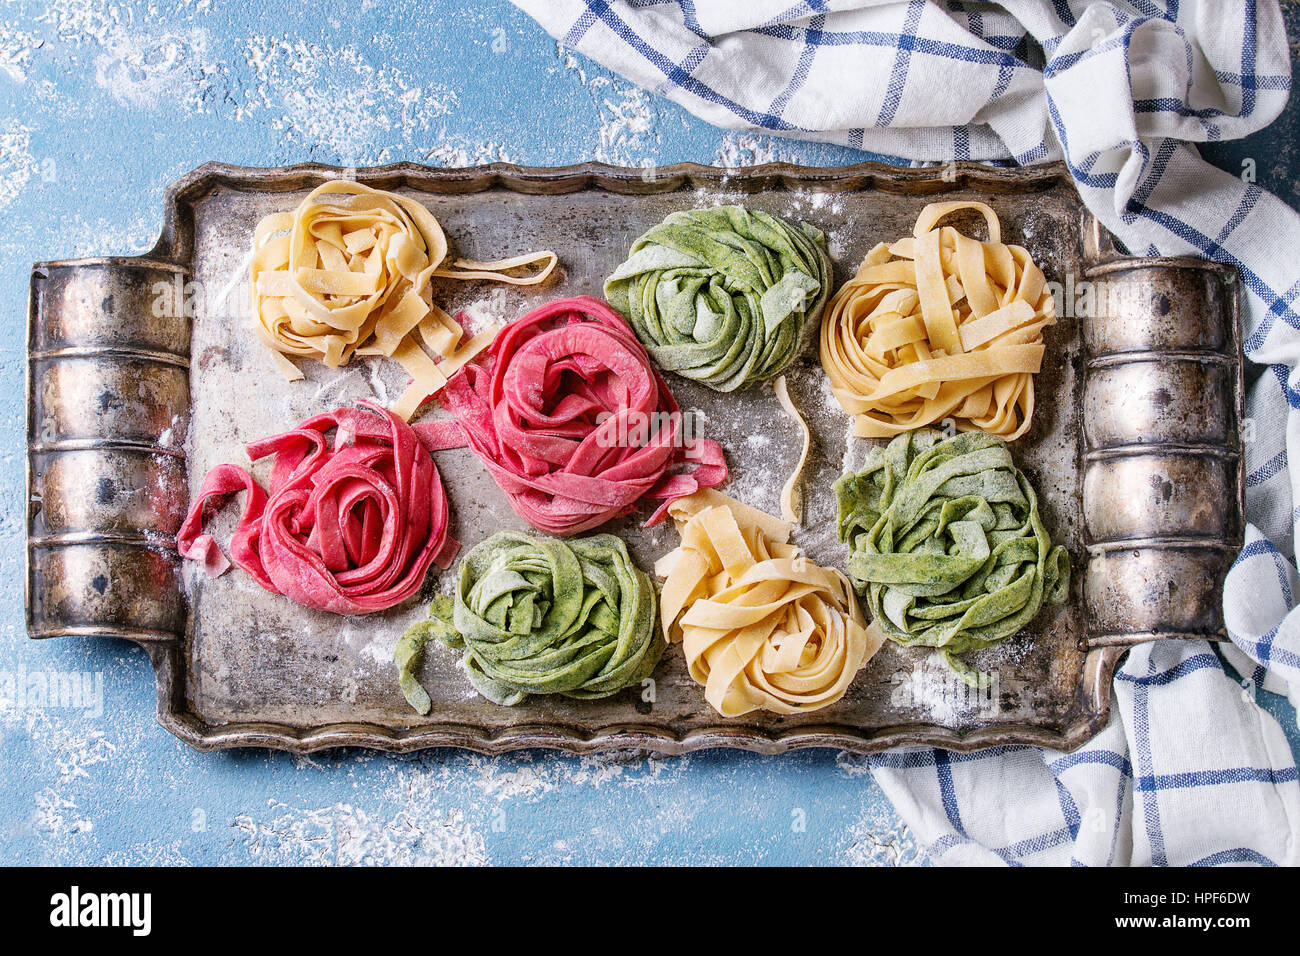 Variety of colored fresh raw uncooked homemade pasta tagliatelle green spinach, pink beetroot and yellow with flour on old metal tray over blue concre Stock Photo